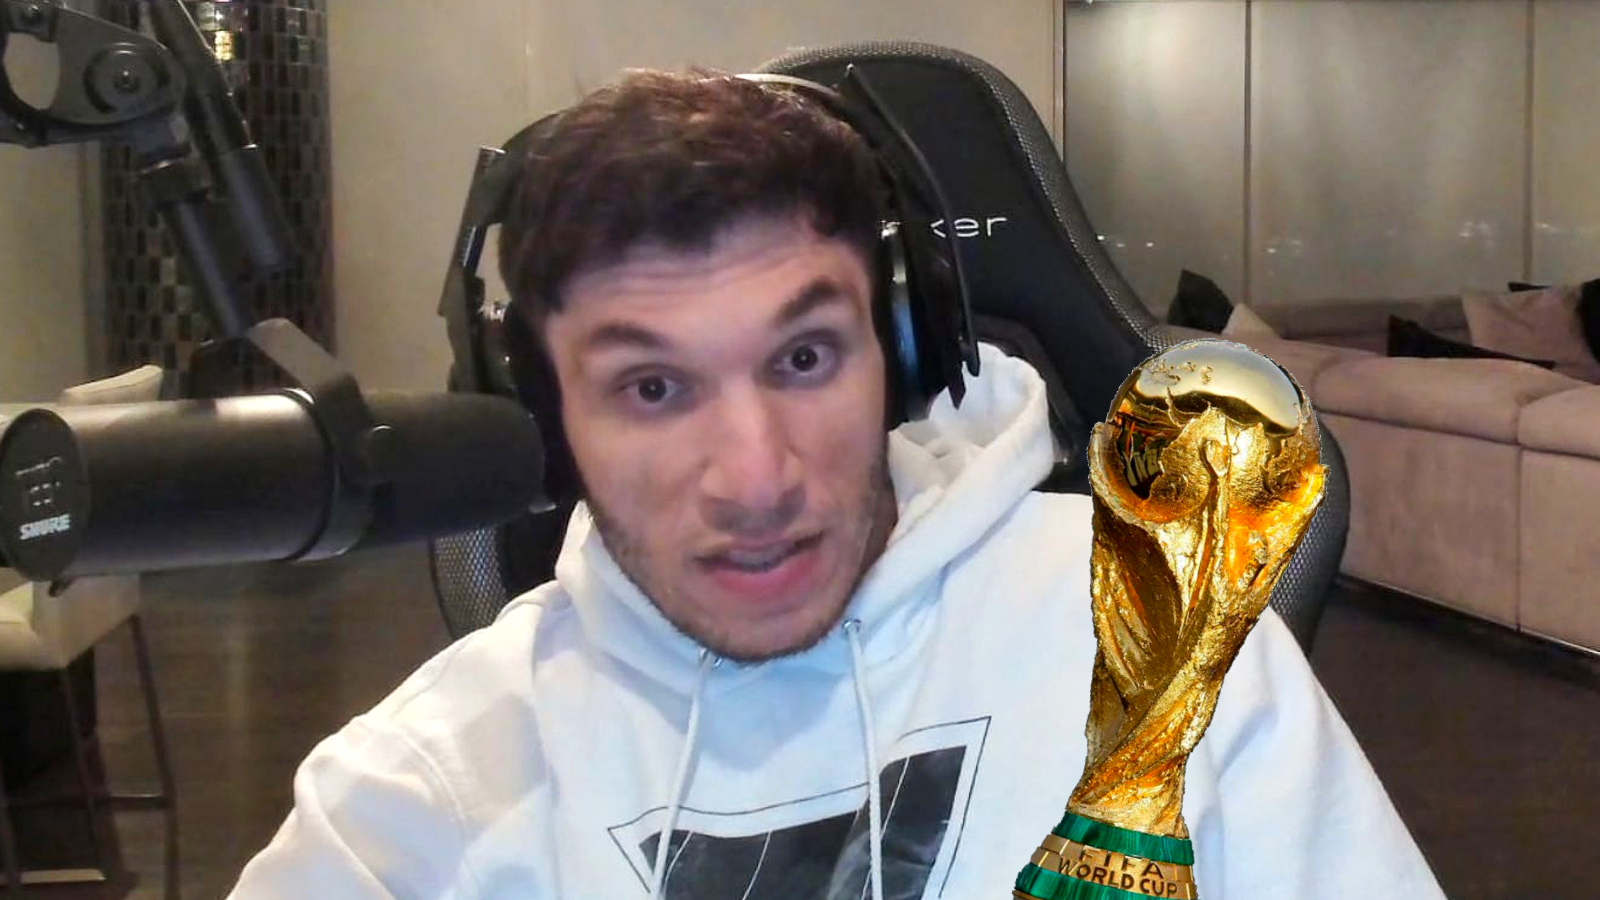 Trainwrecks wins $1.5 million with World Cup bet nobody else predicted